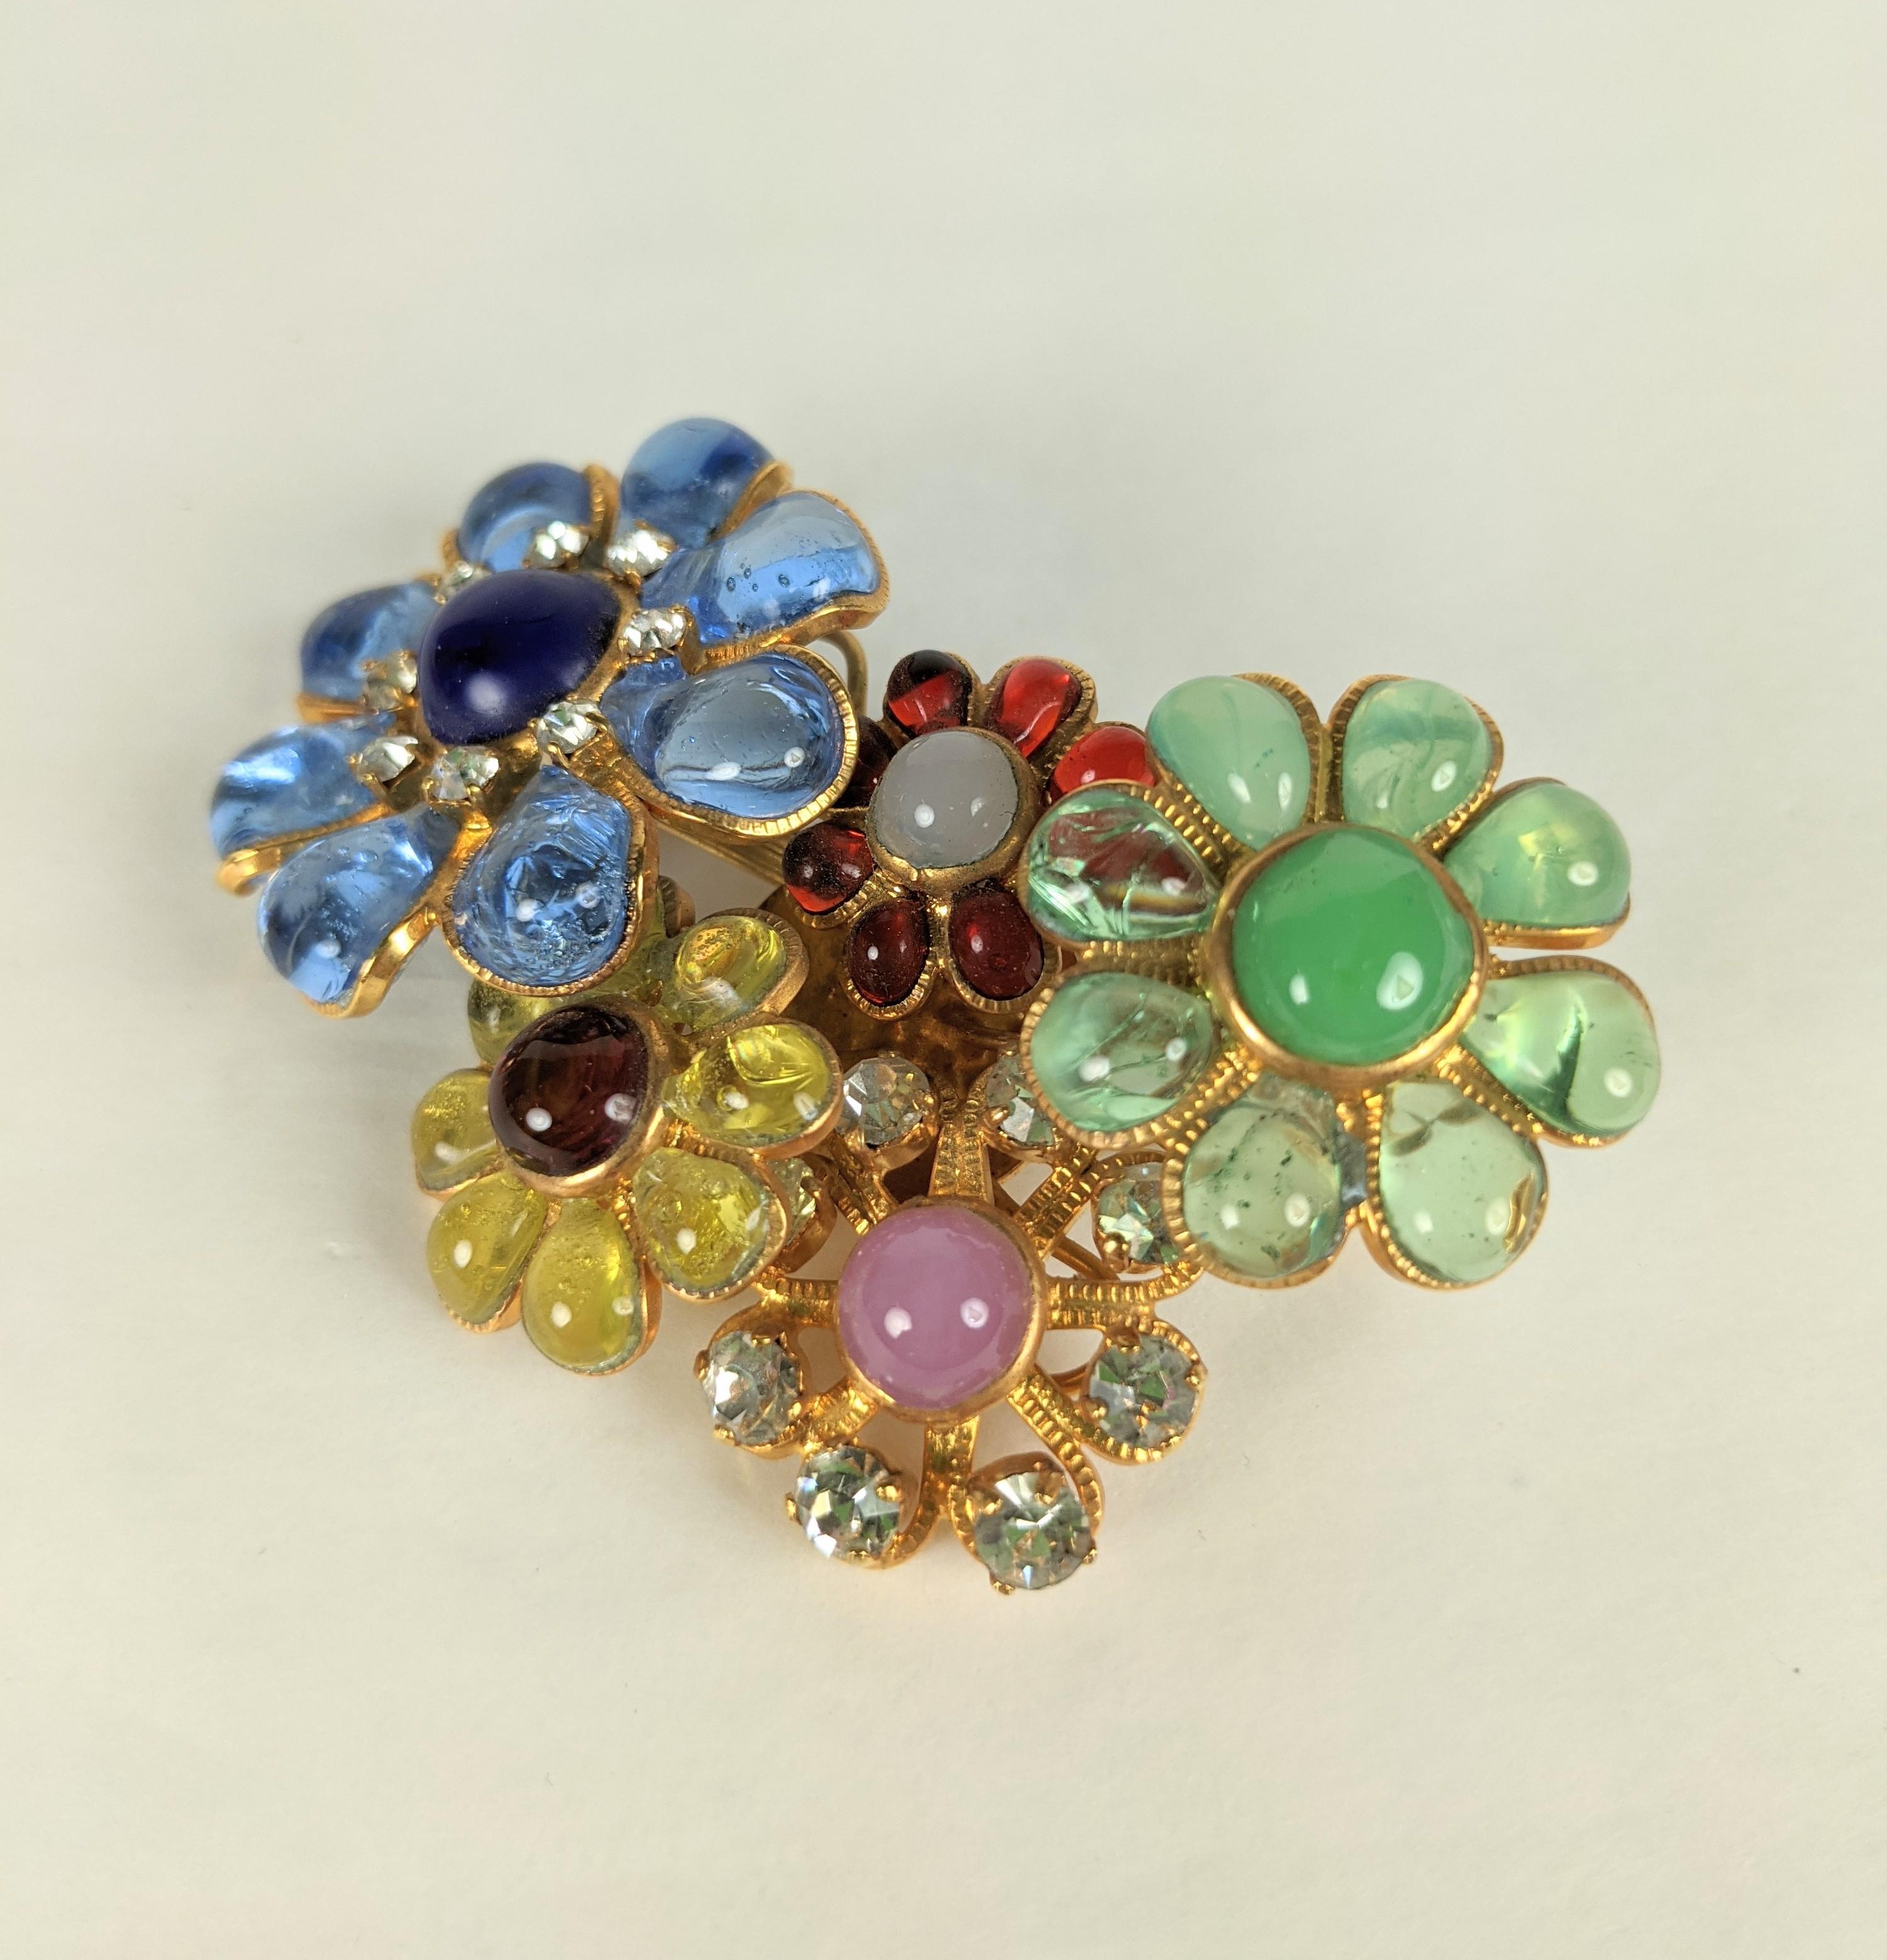 Lovely Chanel Maison Gripoix multi flower, multi layered brooch. Of jewel tone hand poured glass enamel set in gold plated bronze metal with crystal rhinestone accents.
Excellent Condition, Unsigned runway model. Hand made. France 1990's. 
3